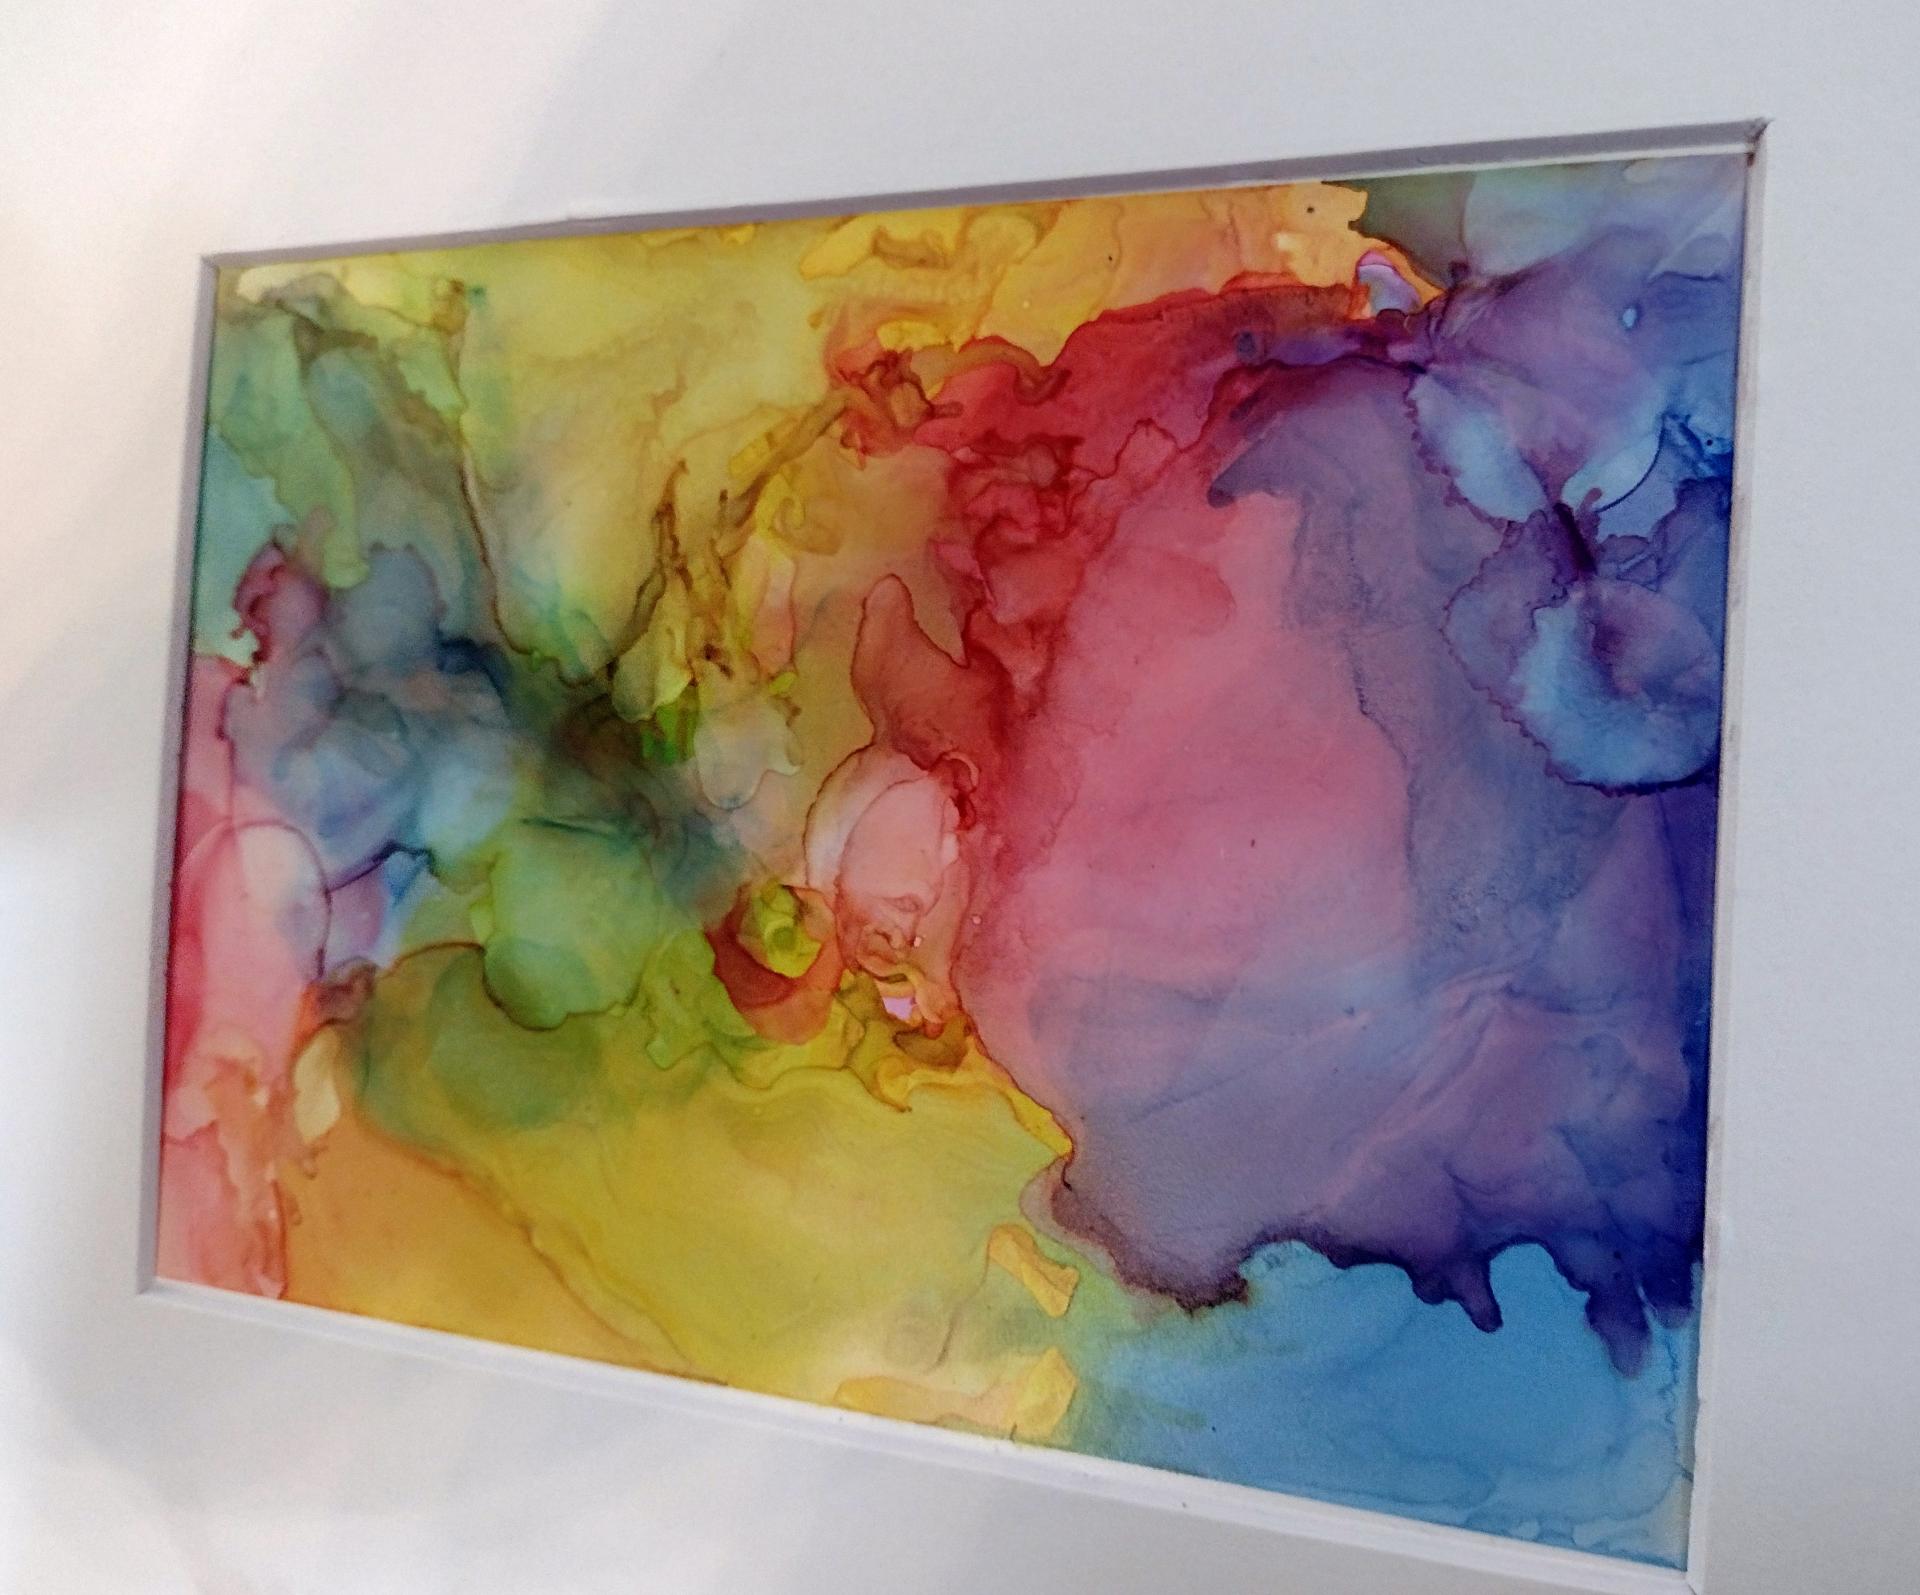 Alcohol Ink Painting, 5 x 7 Matted to 8 x 10, Rainbow Abstract Art